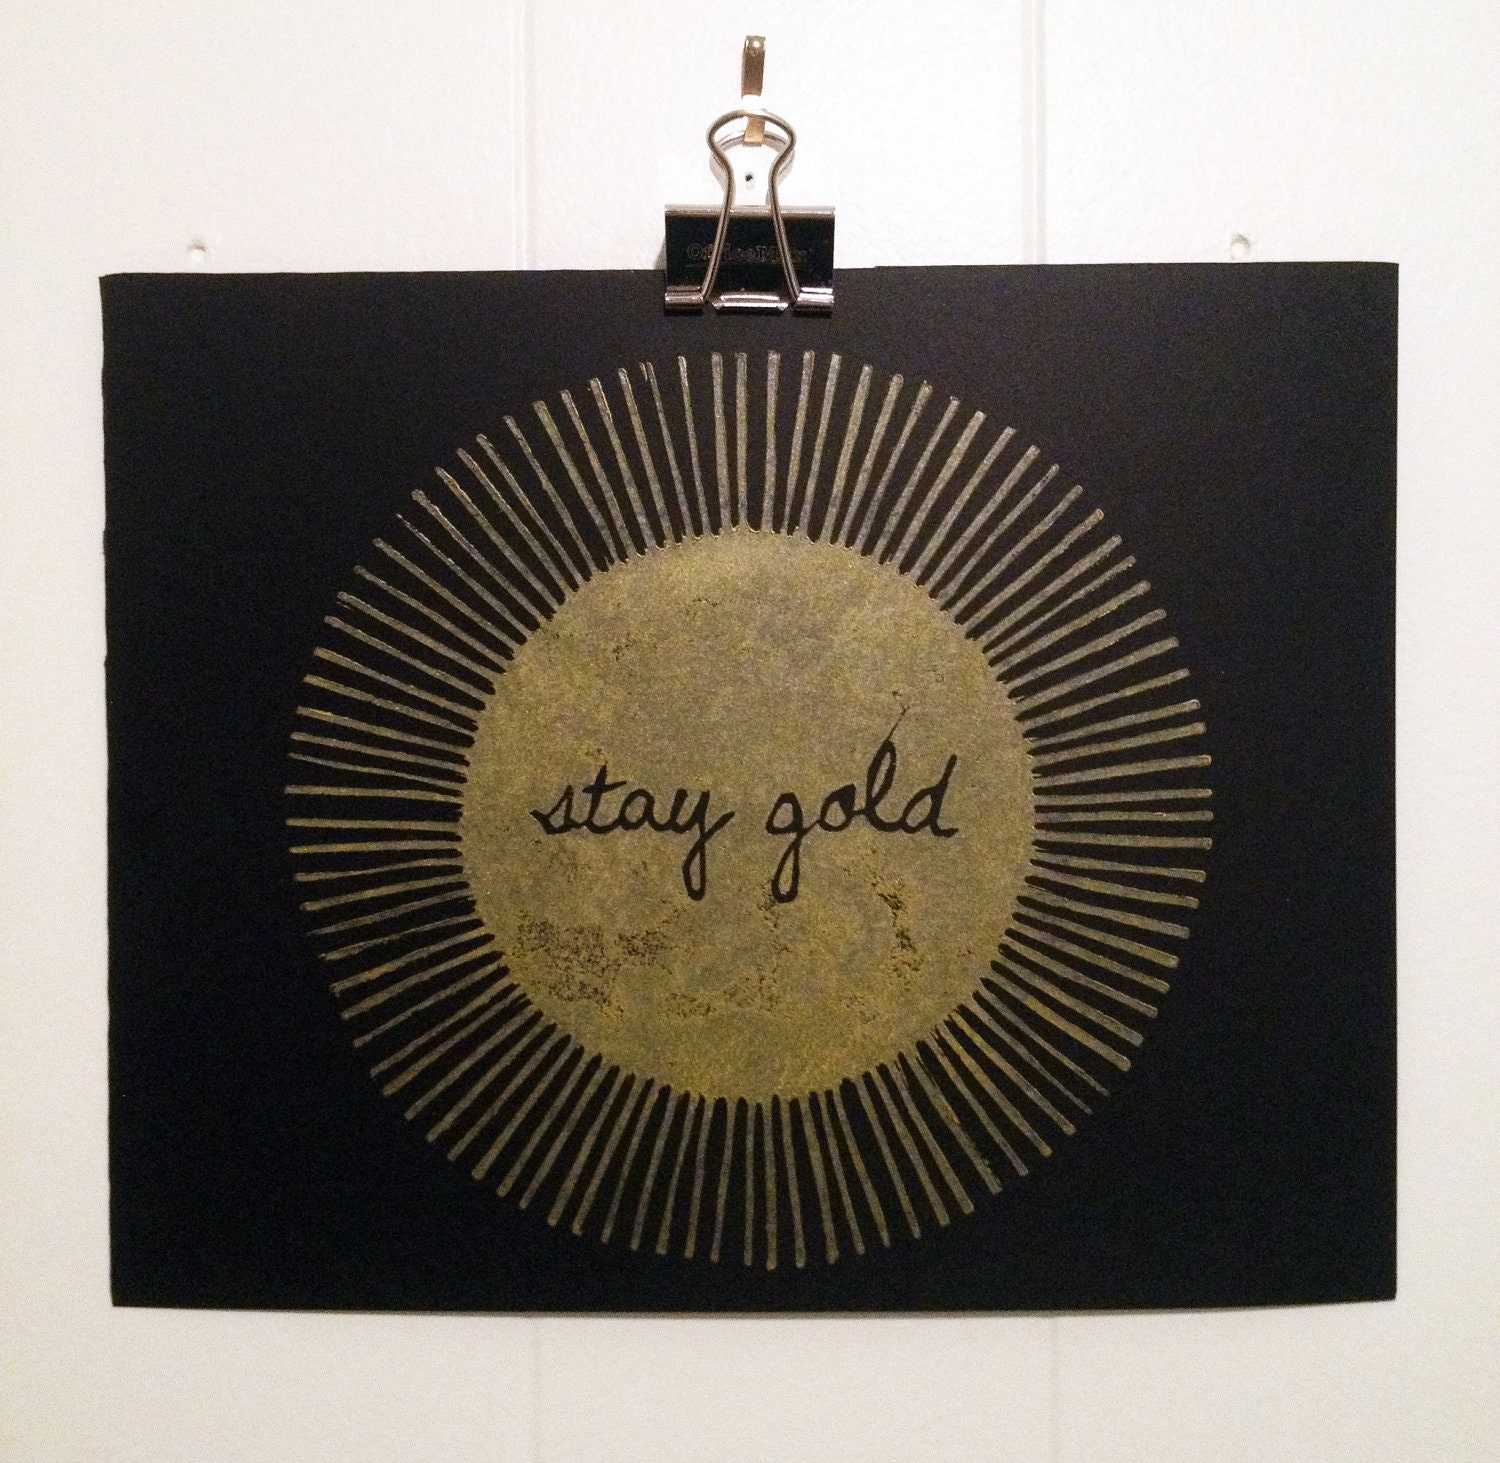 Stay Gold Print 8" x 10" Black and Gold